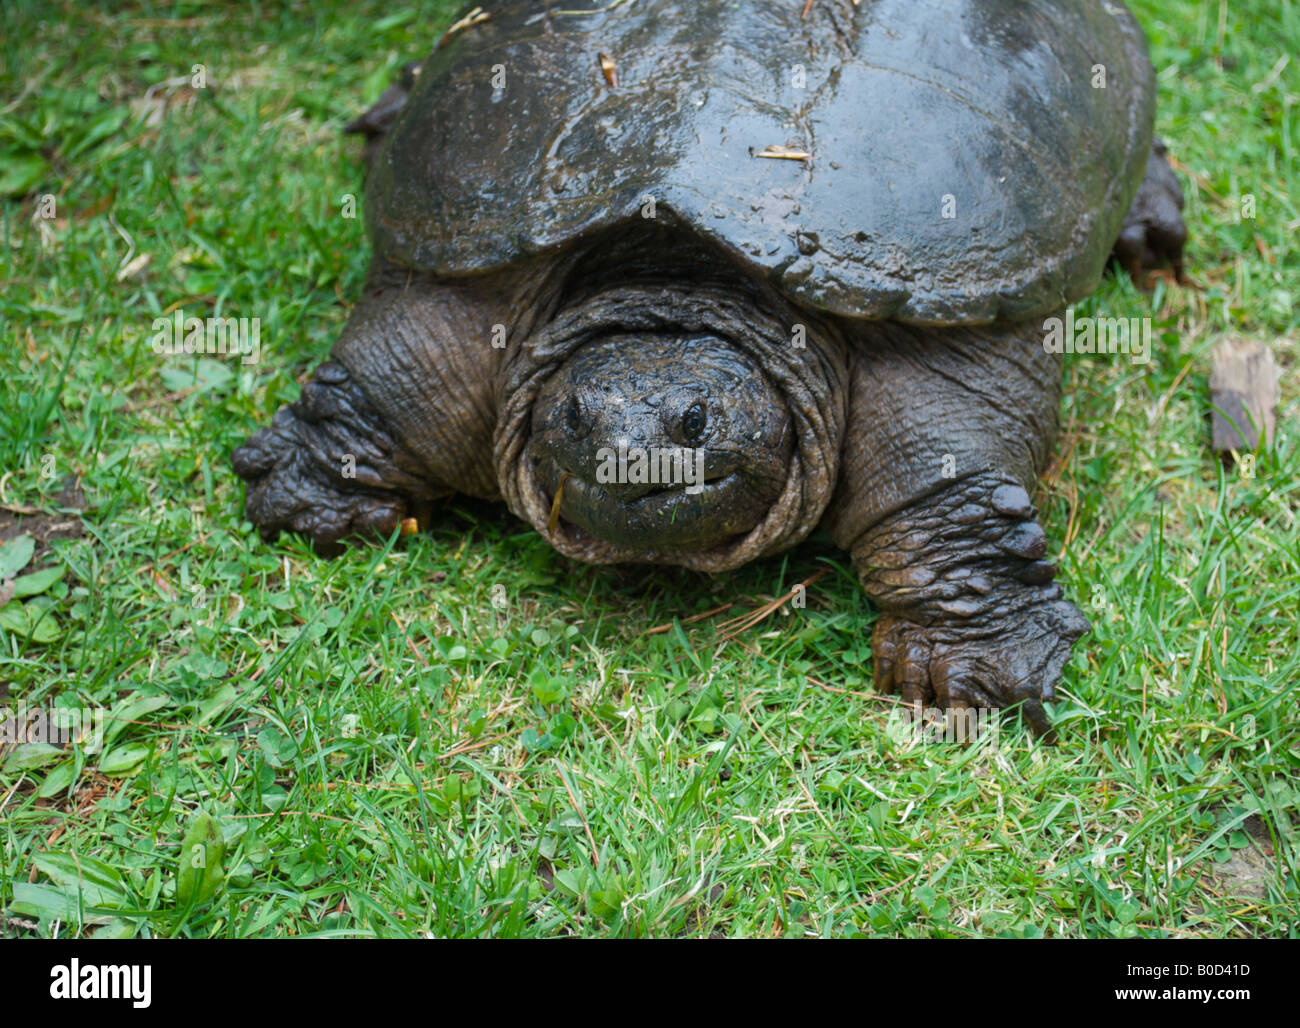 snapping turtle animal wild life reptile large shell claws feet freshwater day outdoor Stock Photo